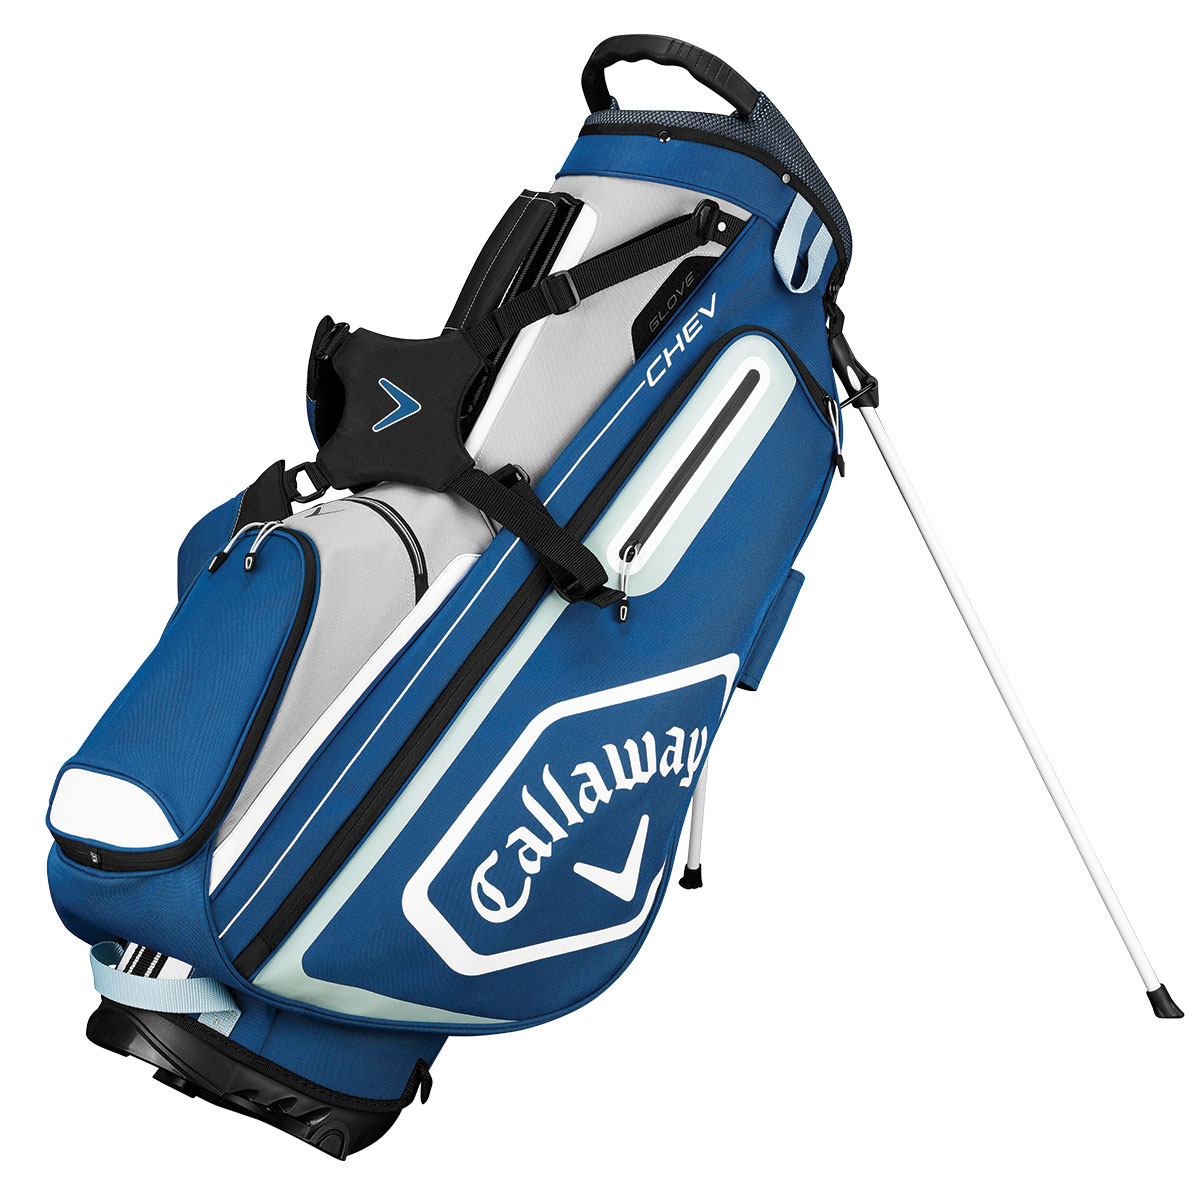 Callaway Golf Chev Stand Bag 2019 from american golf